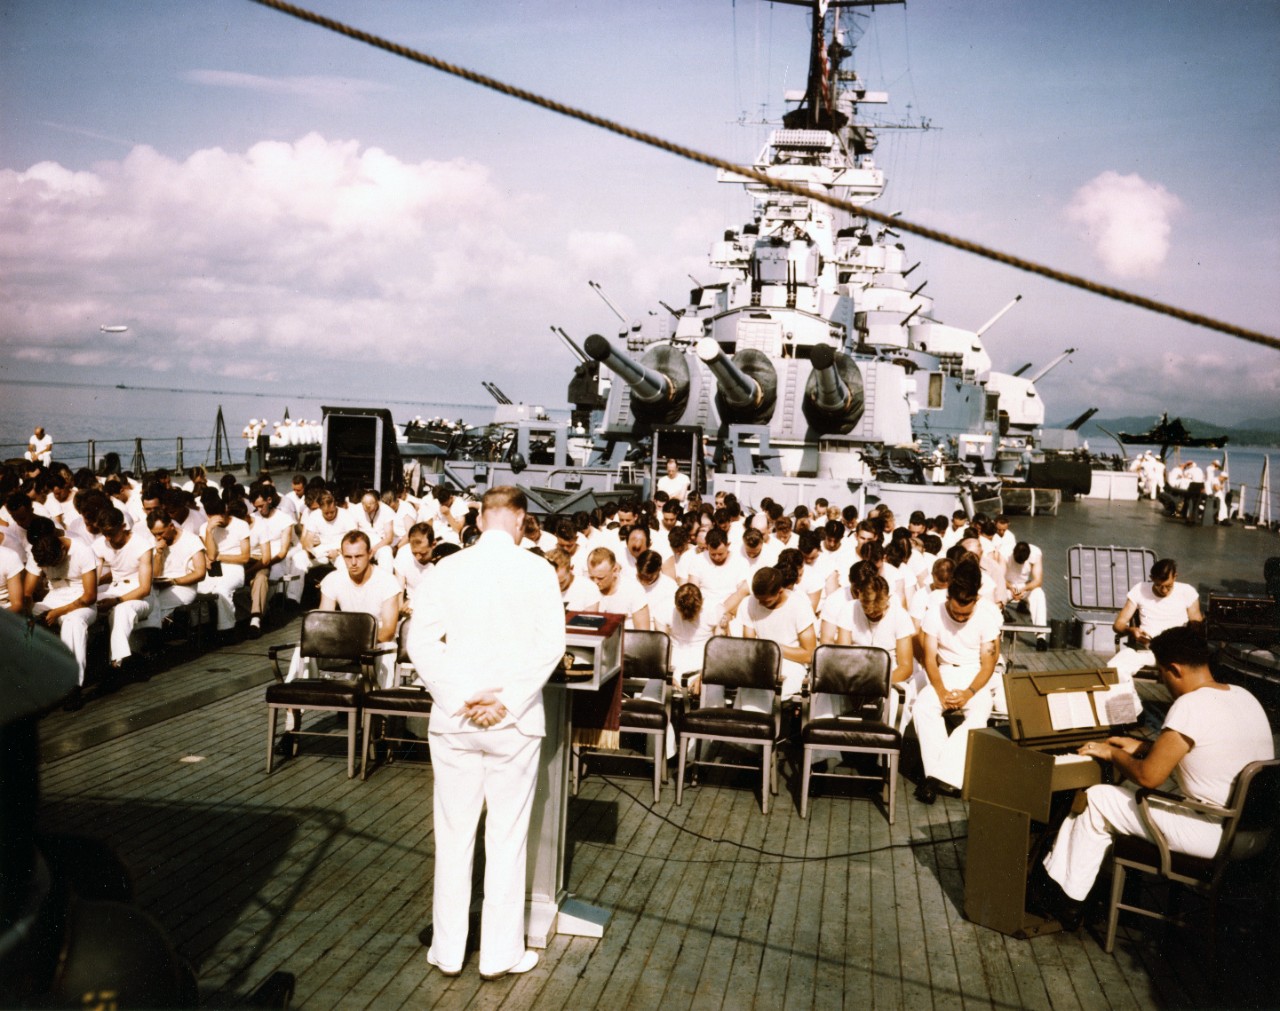 Navy Chaplain Lt Rival Hawkins conducting Sunday services on the USS Missouri’s fantail during the ship’s shakedown cruise in the Trinidad area, Aug 1944. The censored ship at right is the USS Alaska.